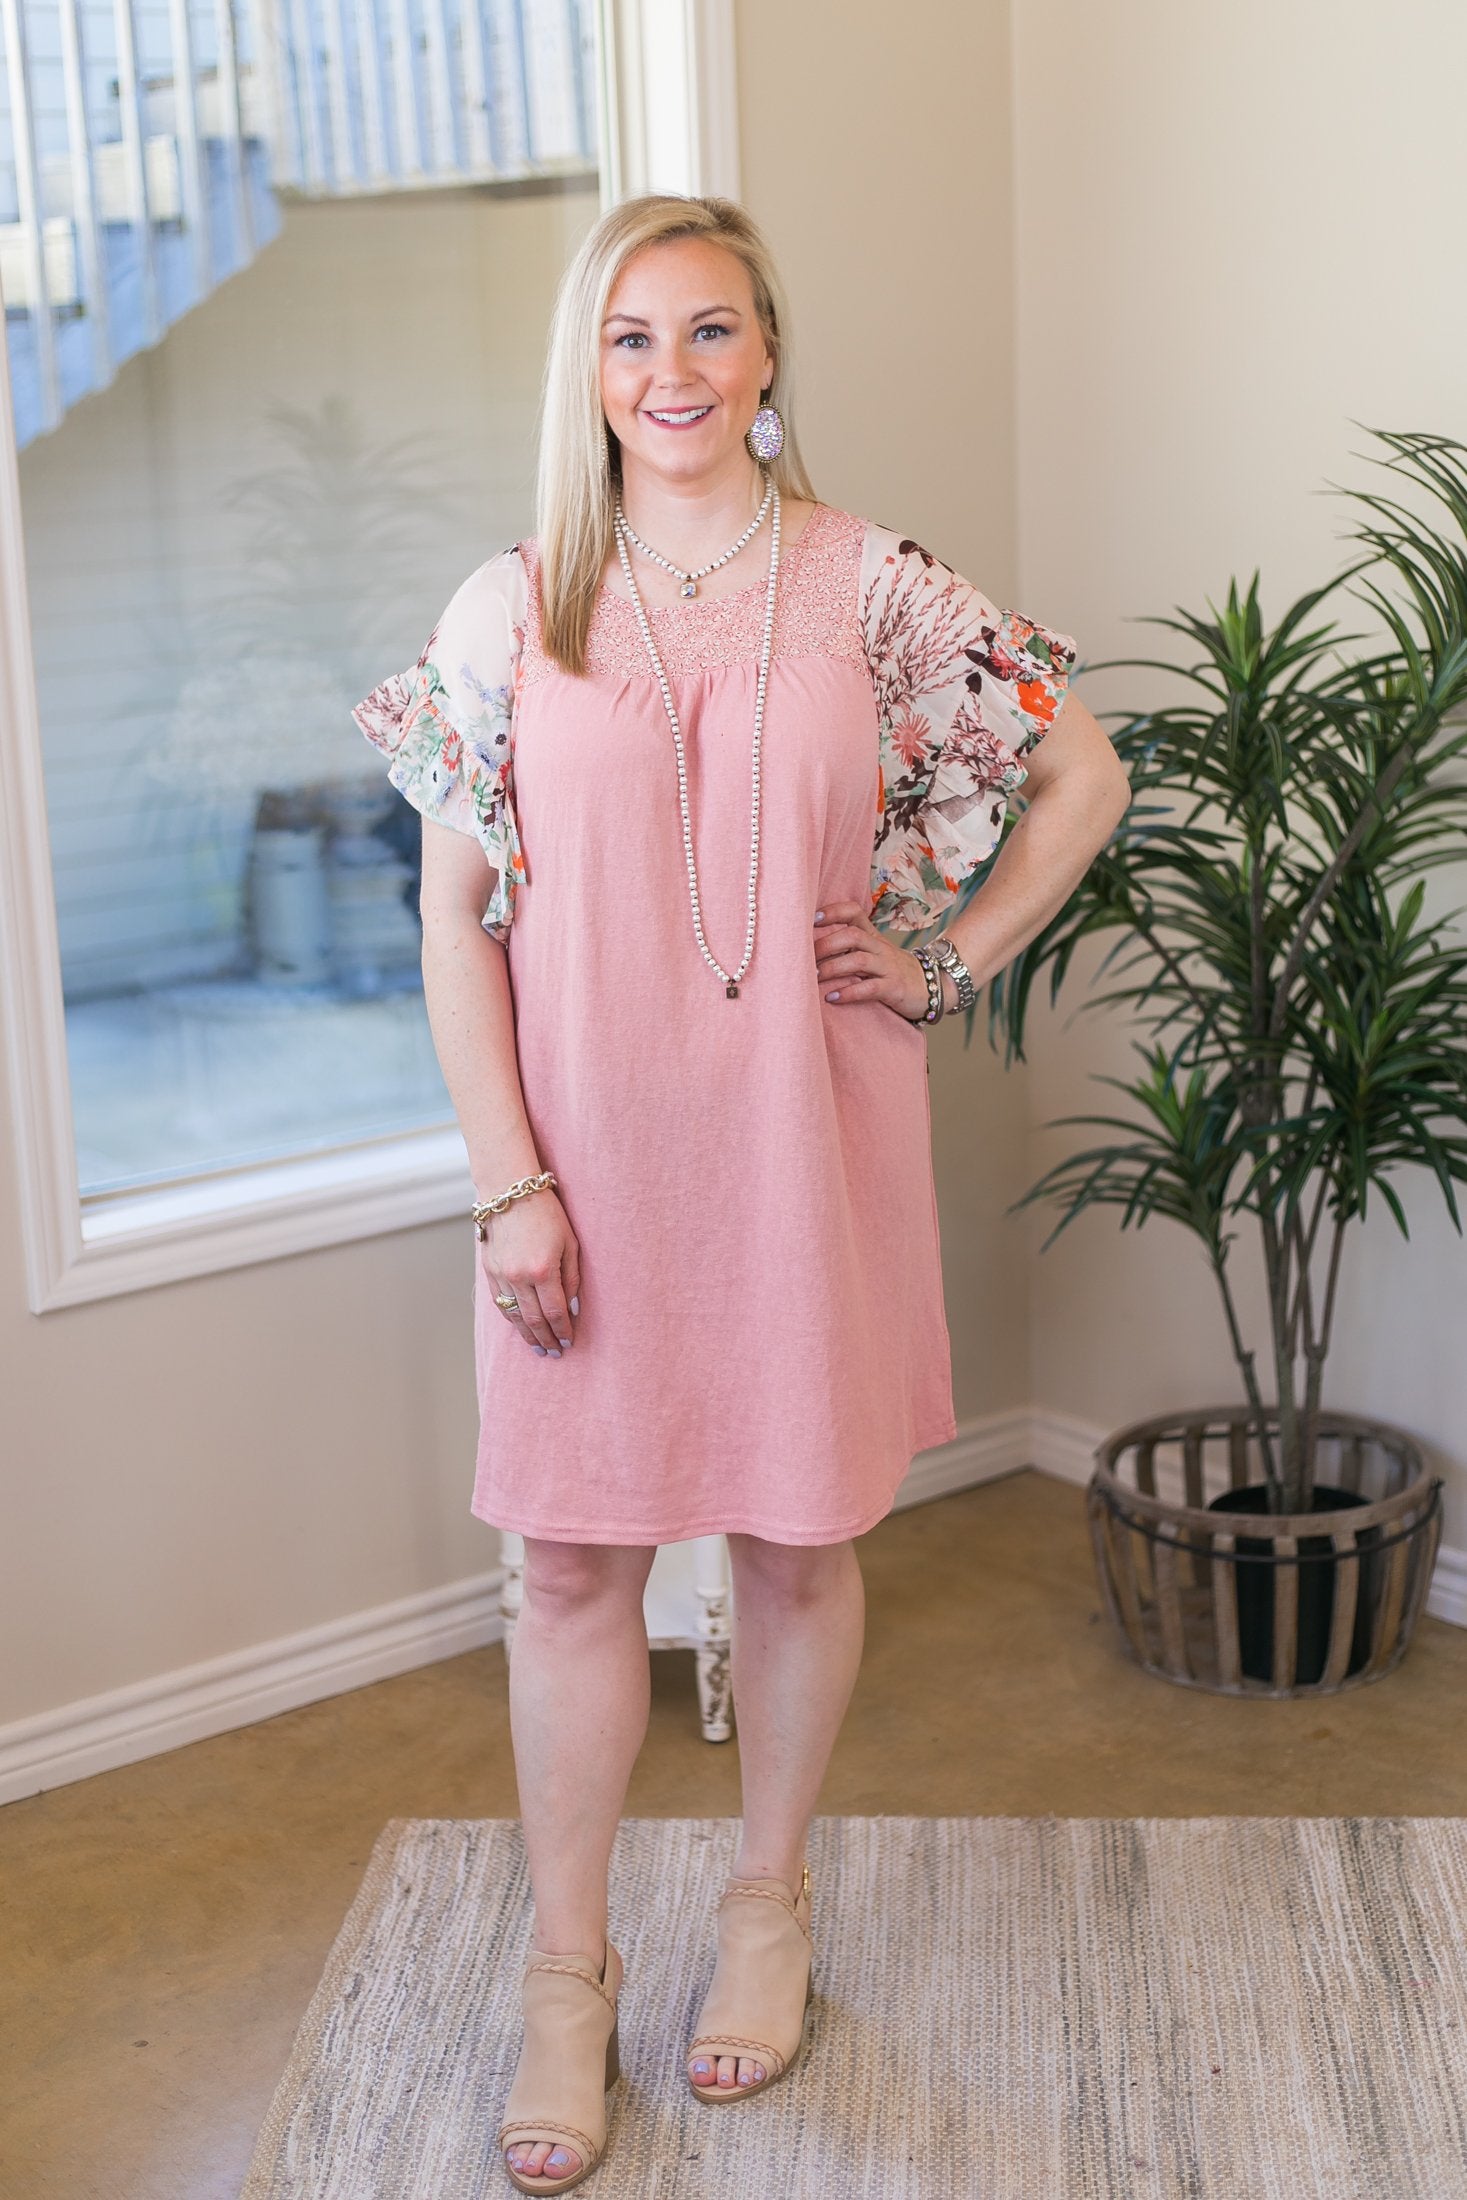 Spring Time Delight Floral Ruffle Sleeve Dress with Leopard Accents in Blush Pink